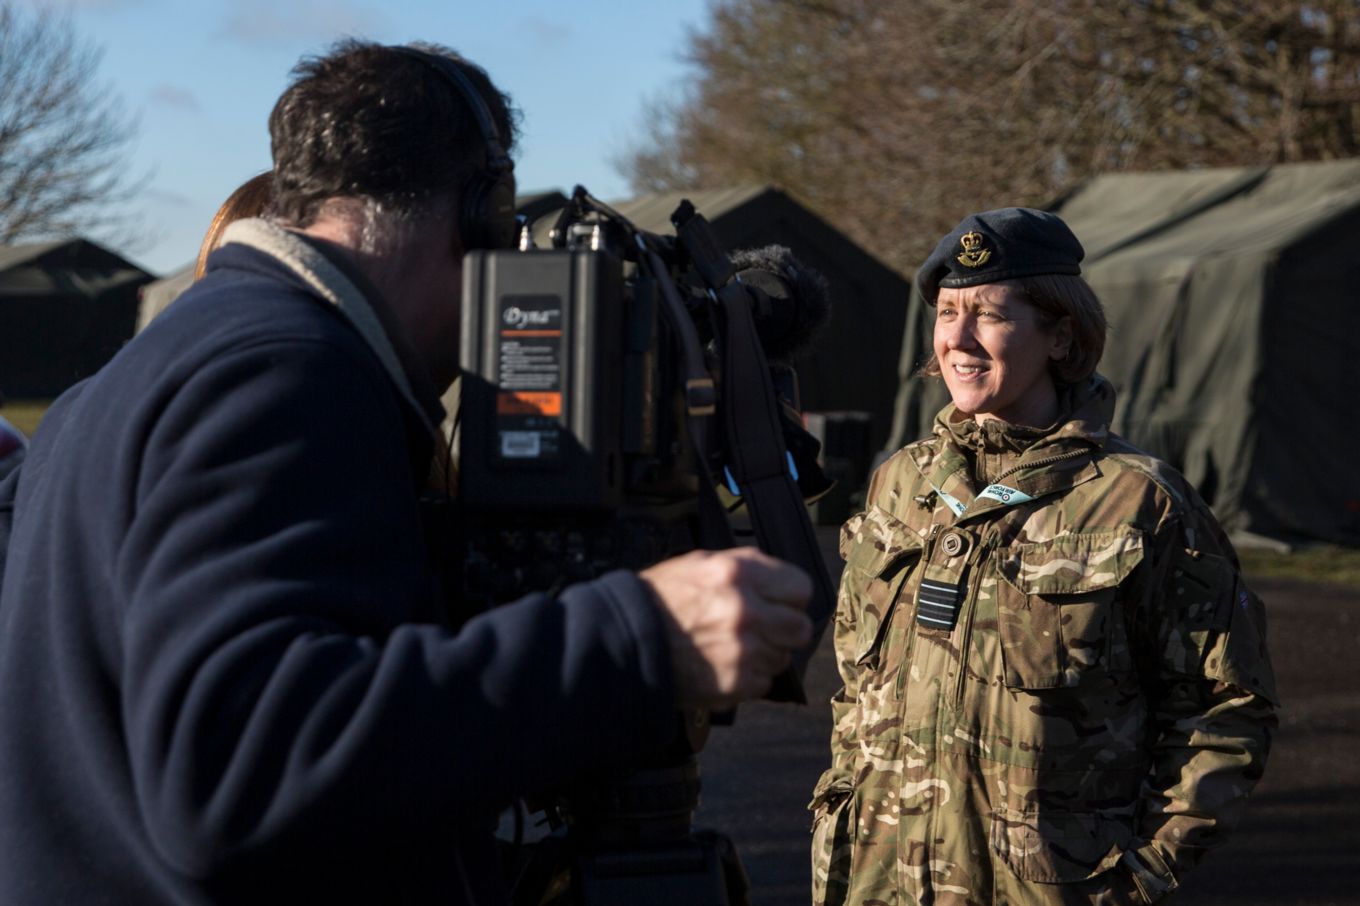 Wing Commander Wright interviewed during an exercise in January.